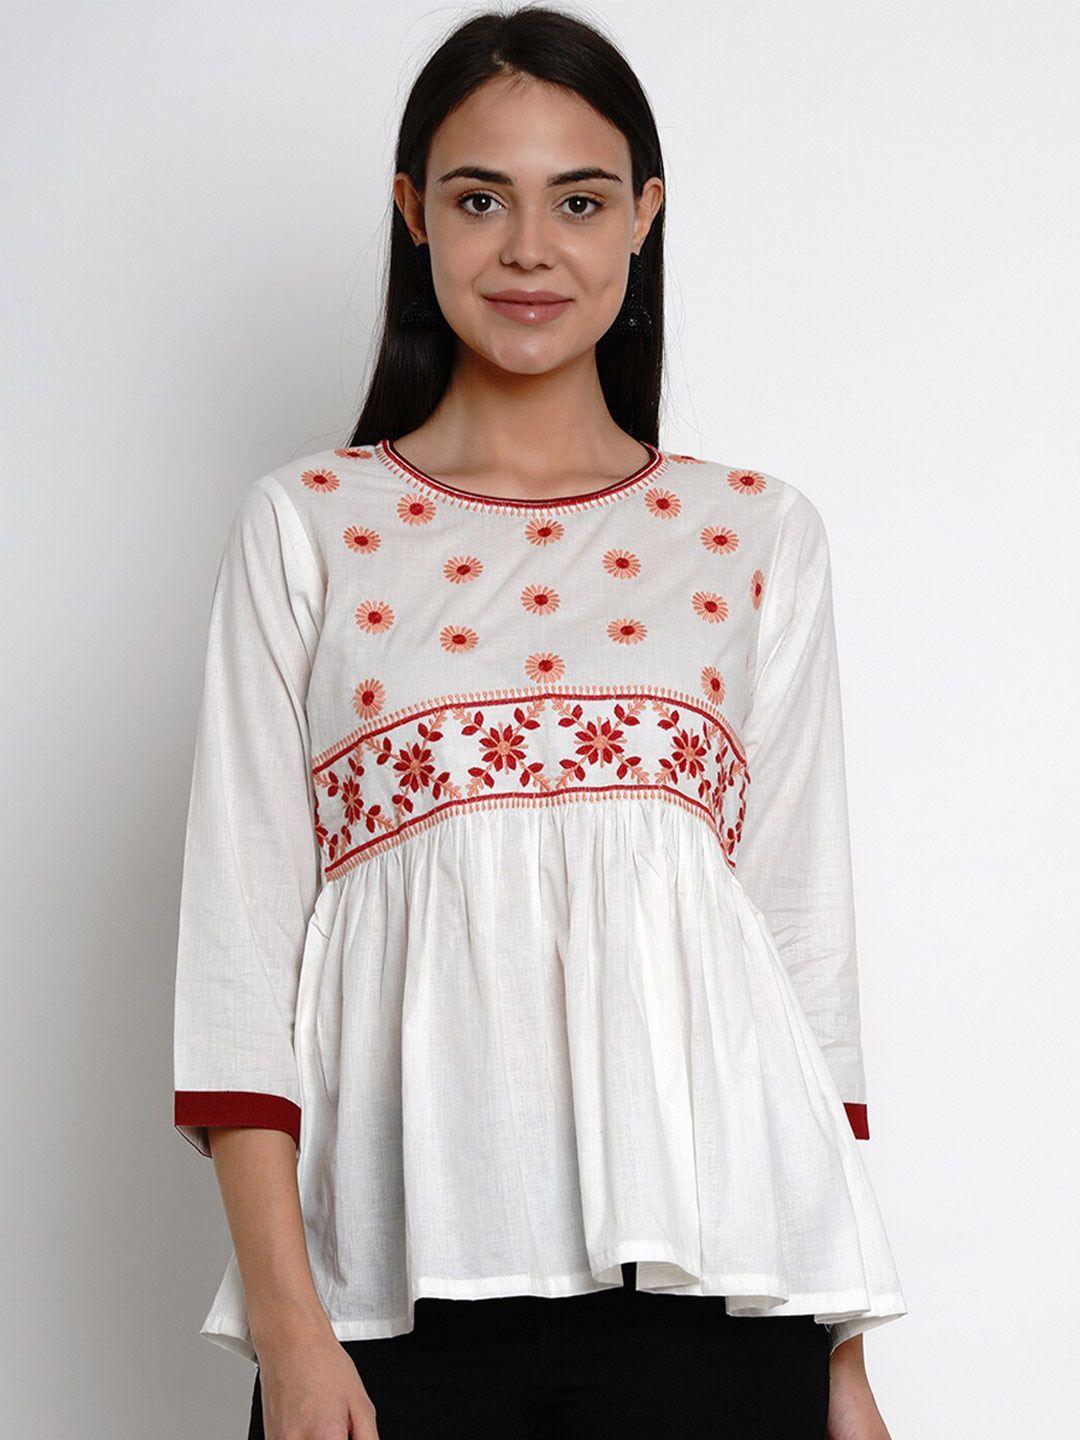 bhama couture off white floral embroidered top